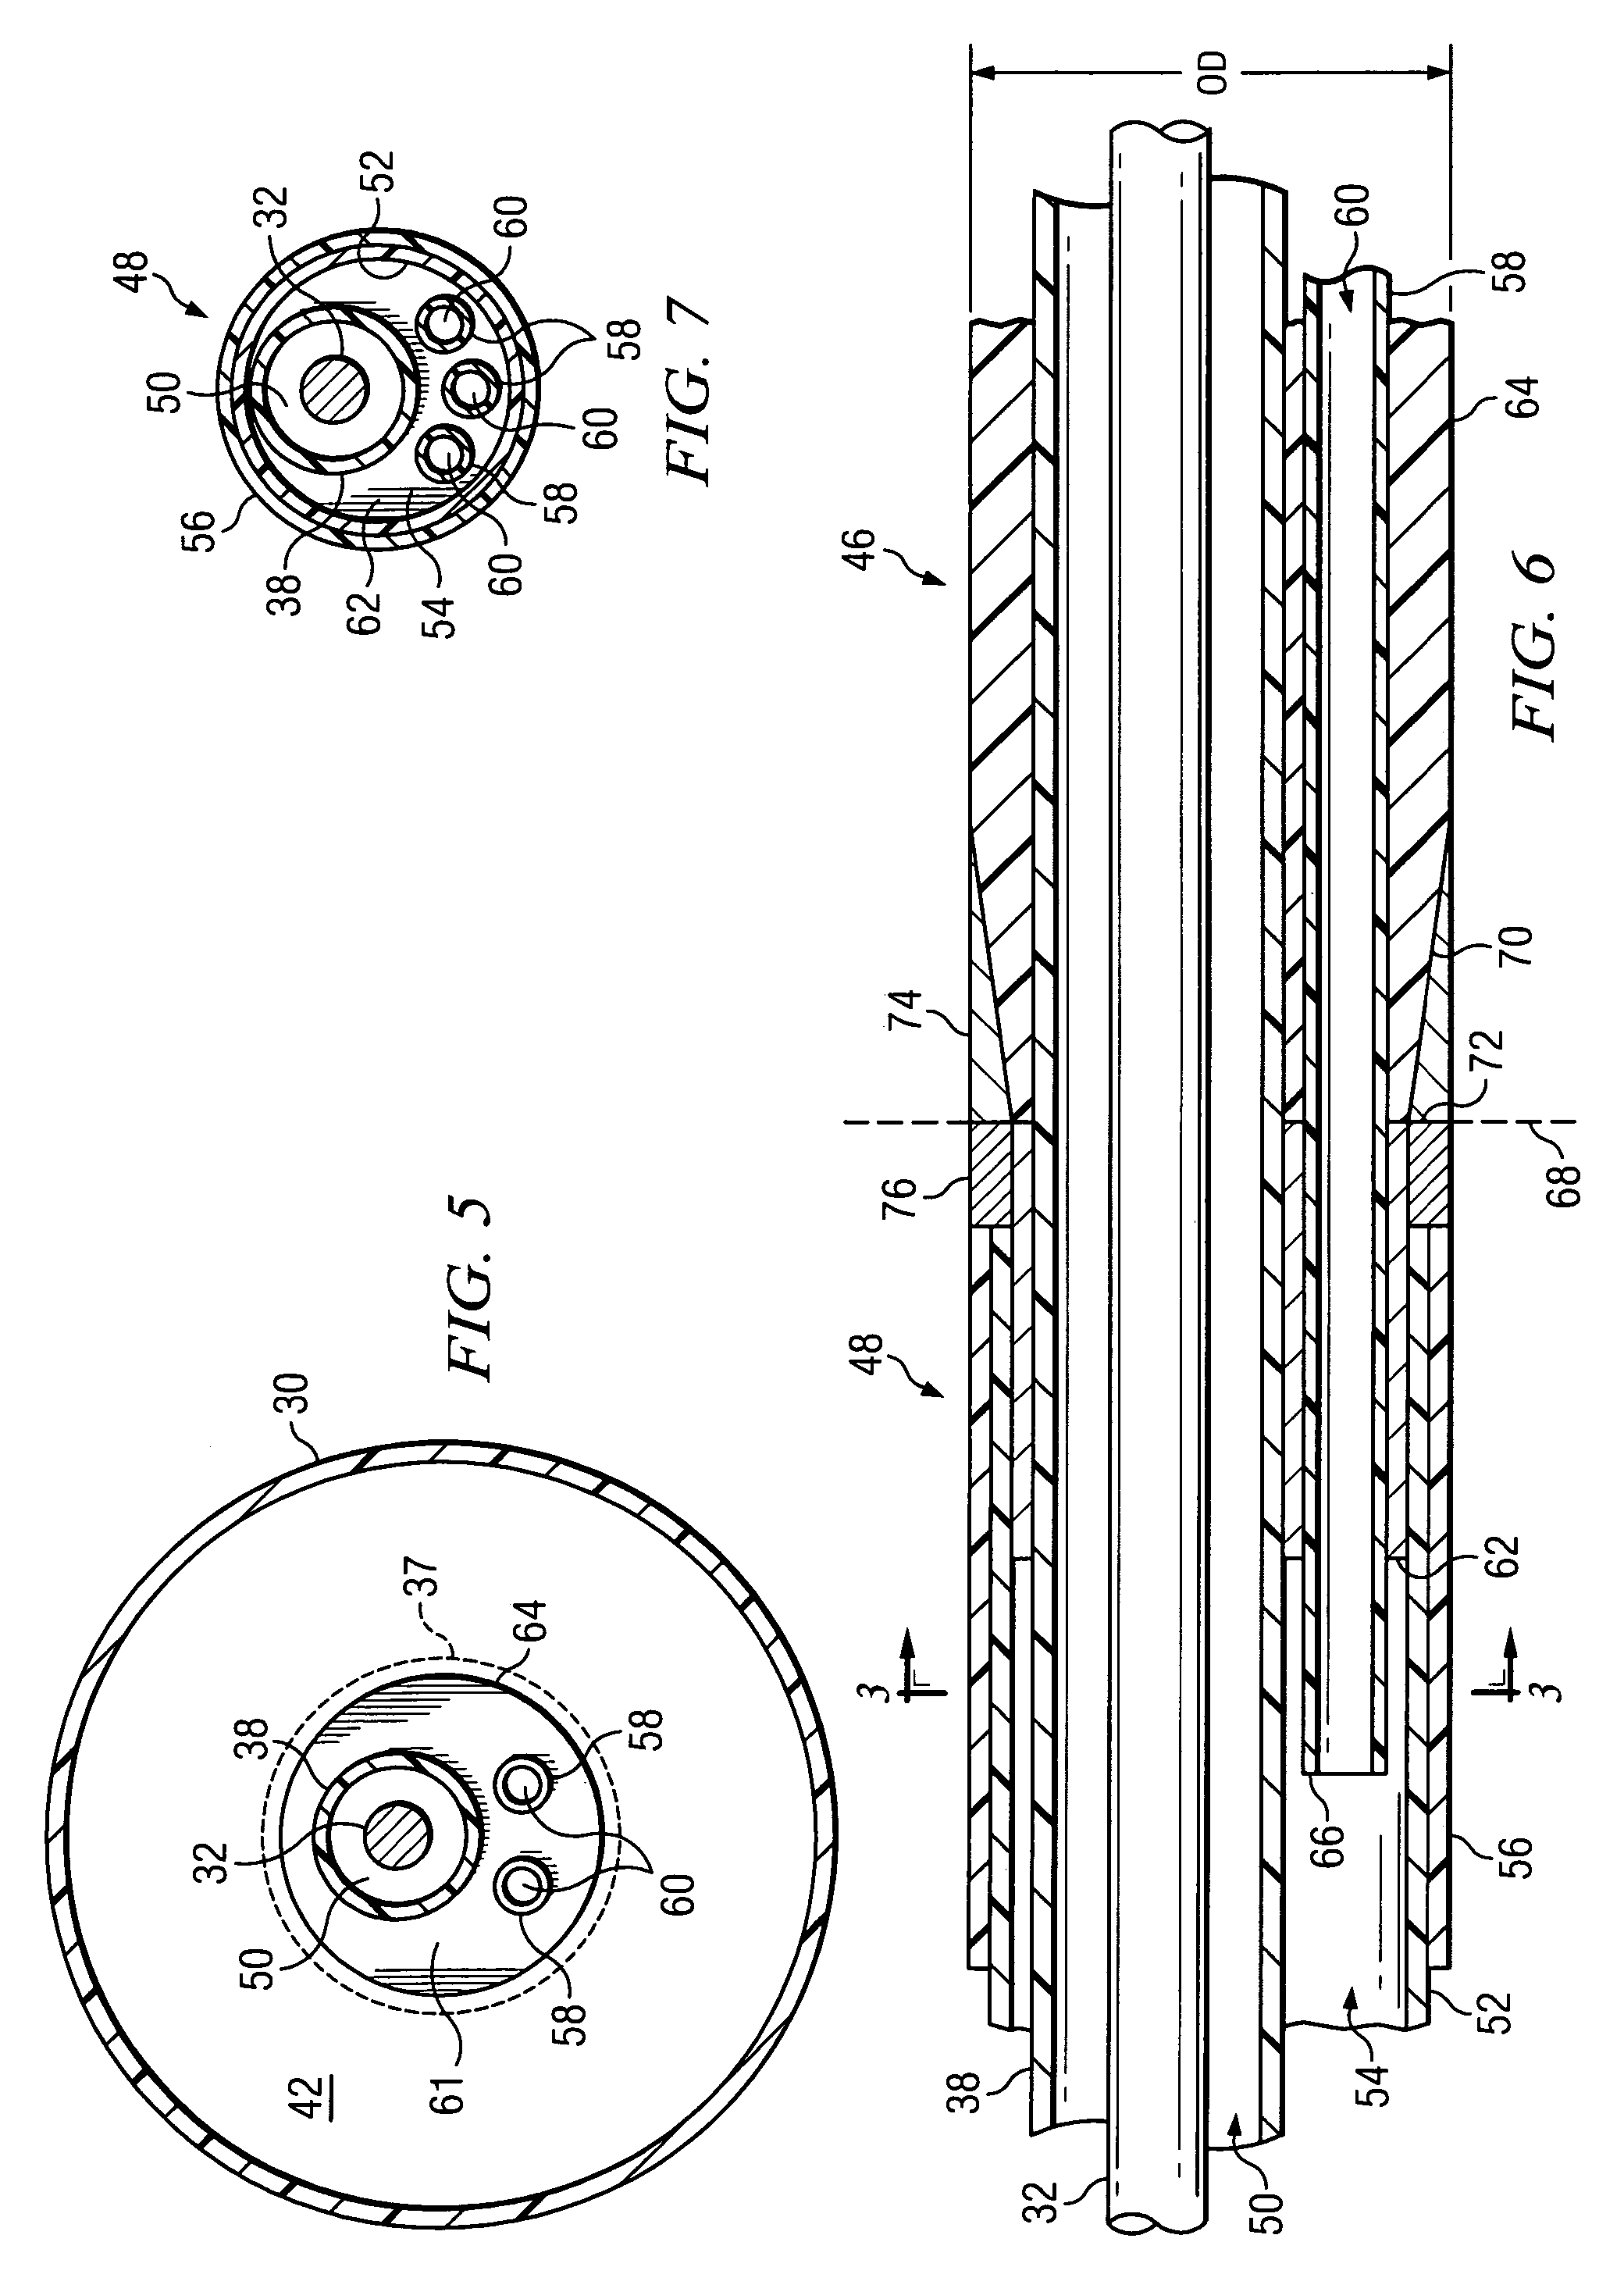 Balloon dilation catheter having transition from coaxial lumens to non-coaxial multiple lumens